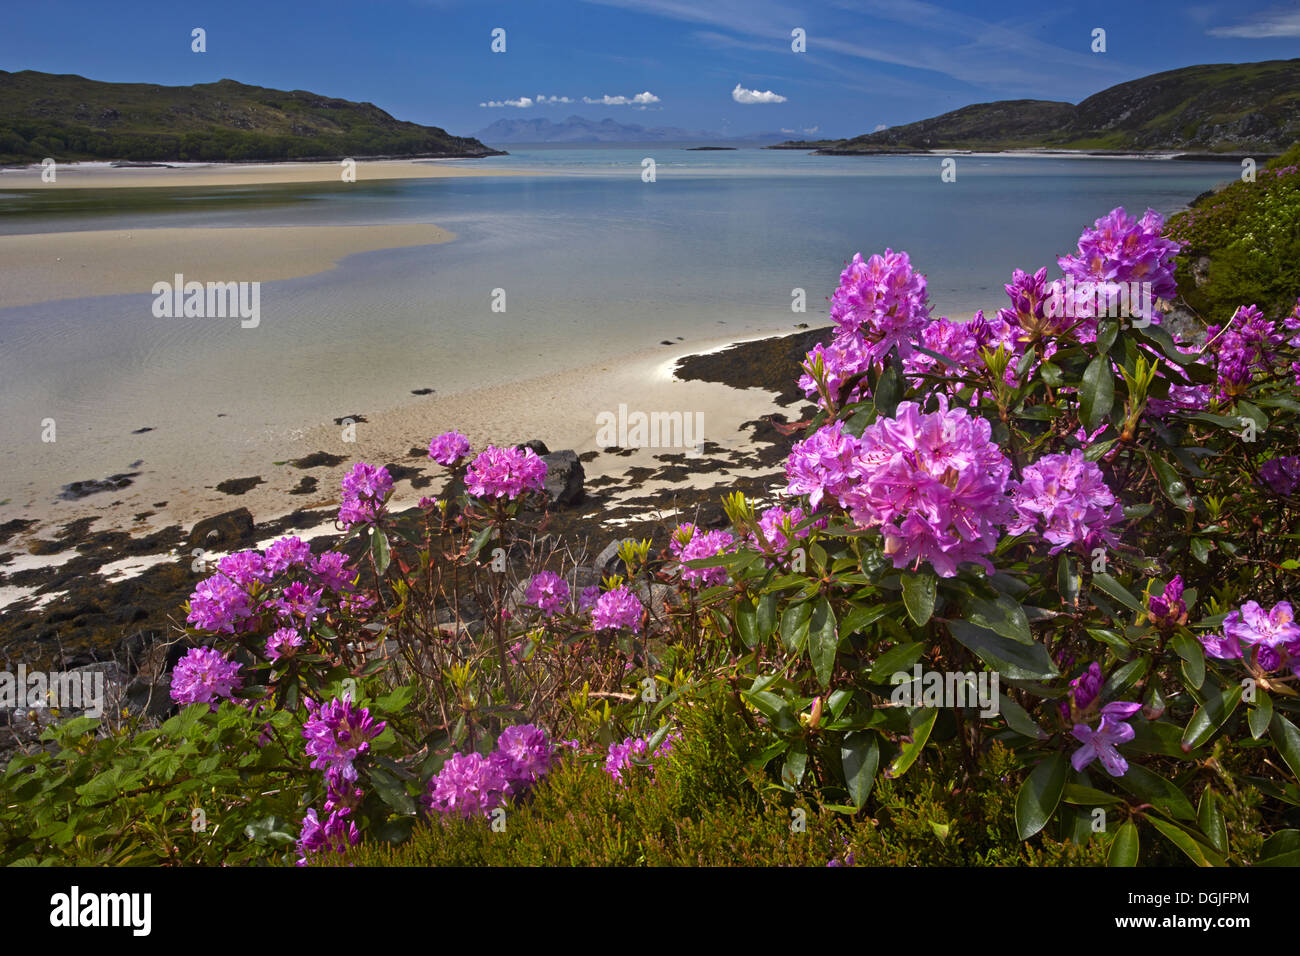 The view over Morar Sands with the islands of Eigg and Rhum on the horizon. Stock Photo